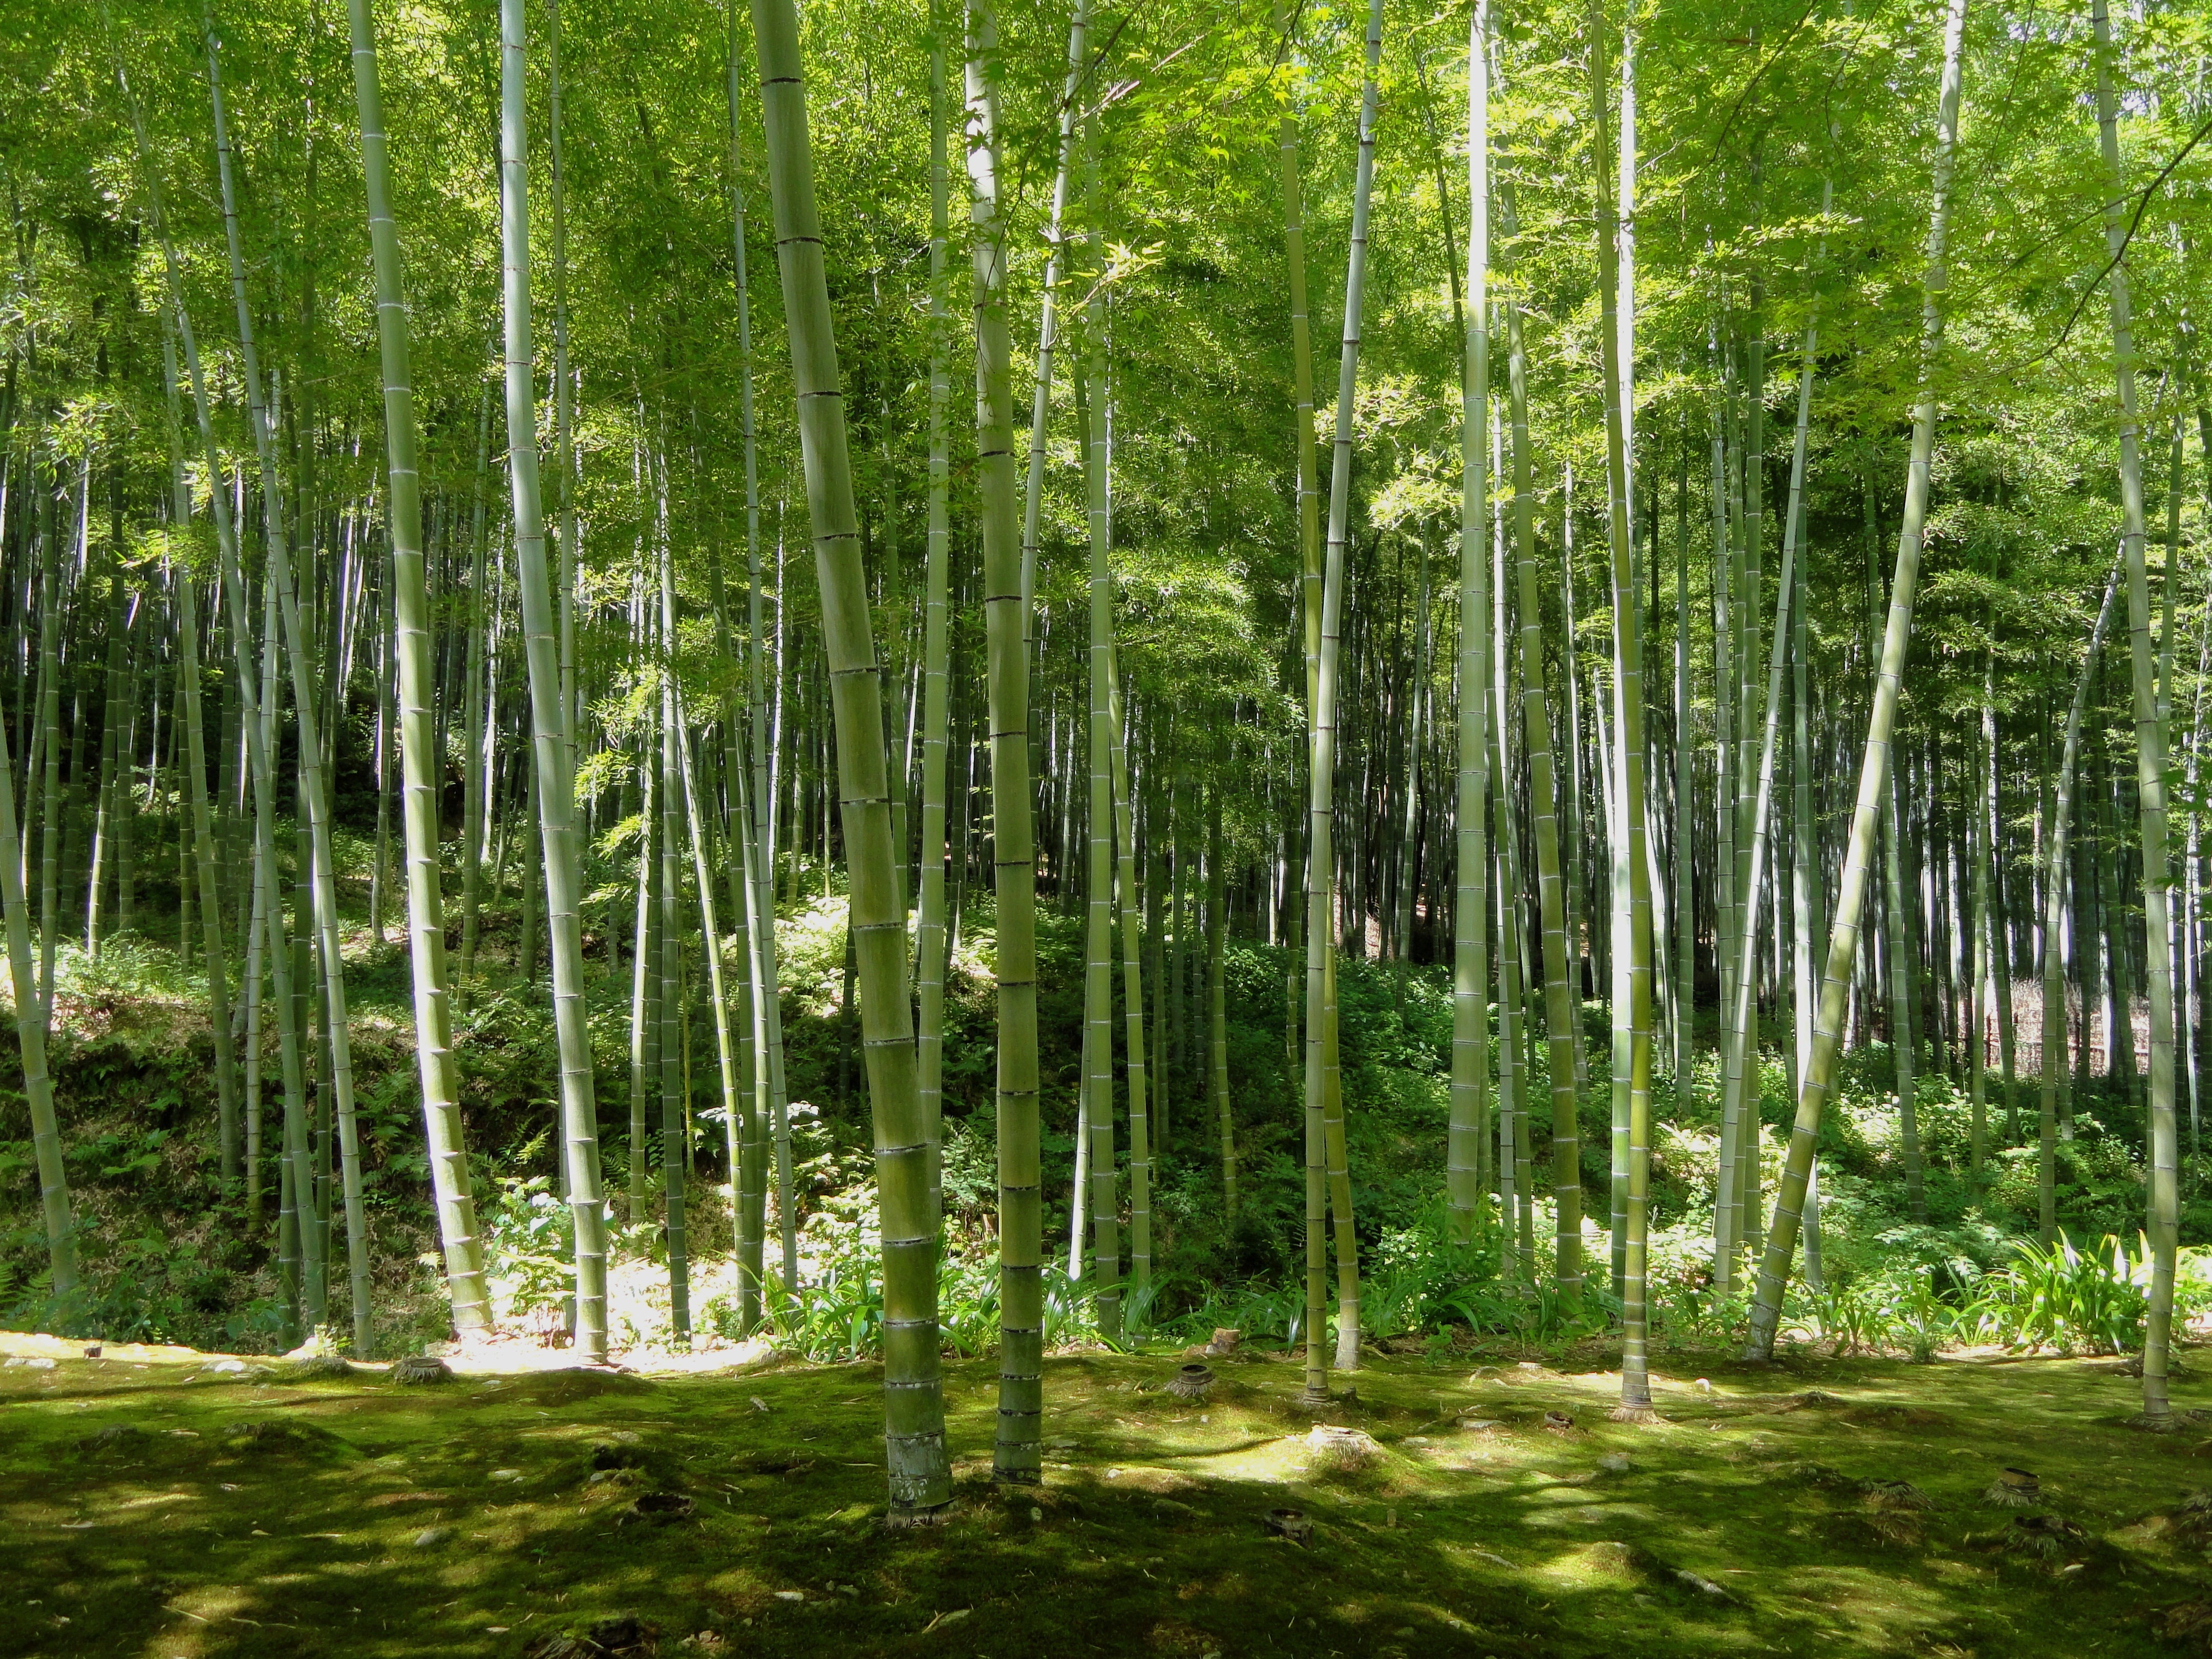 Bamboo Forest
kyoto_japan_bamboo